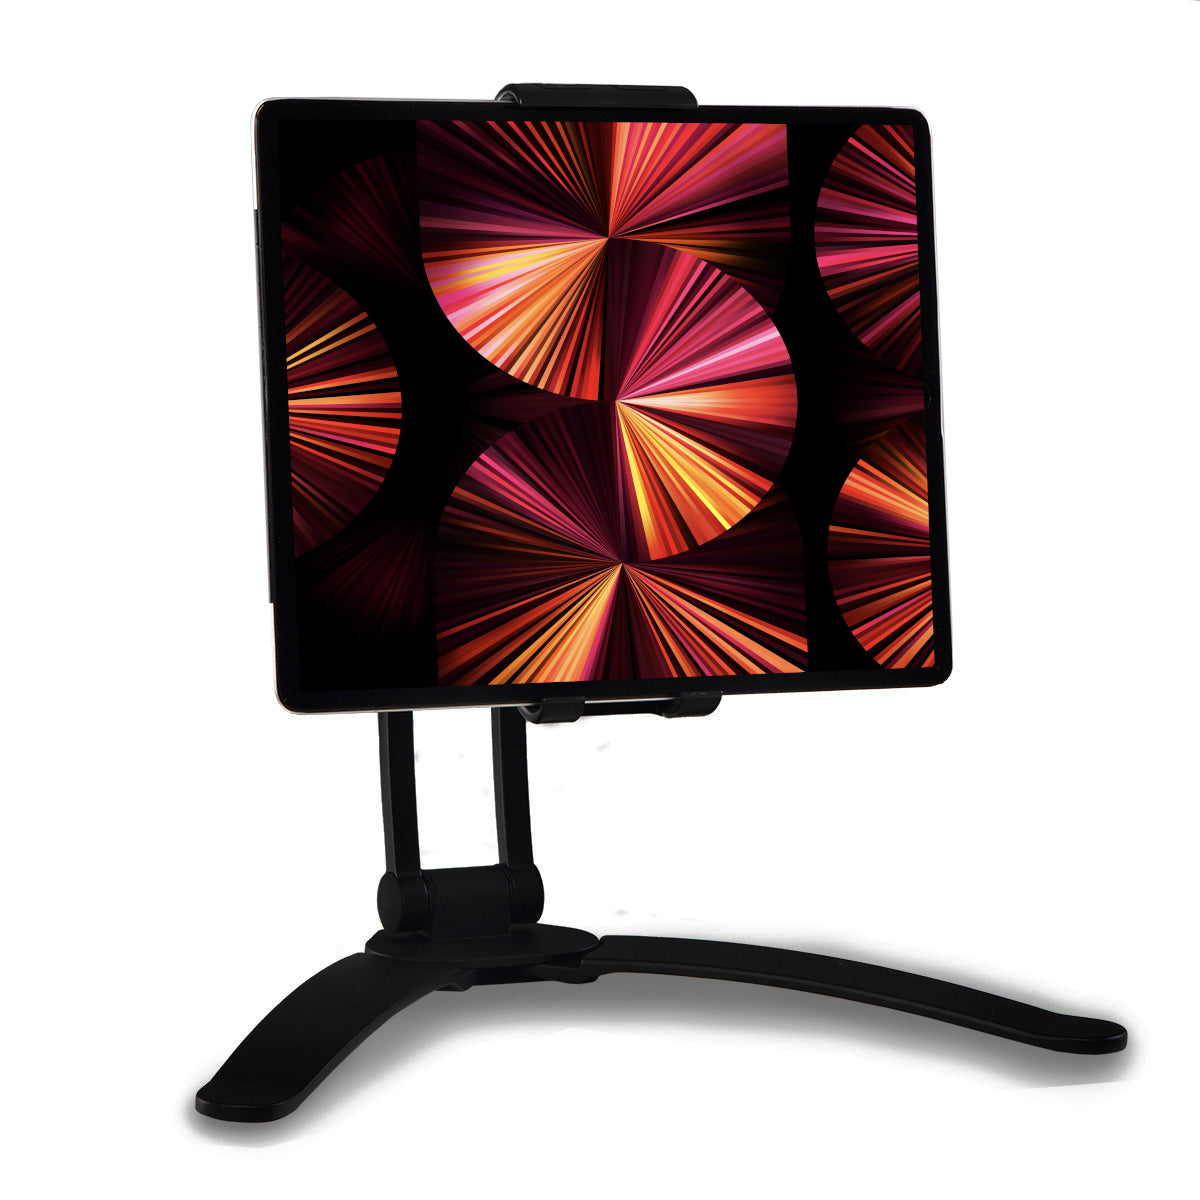 An iPad Tablet Computer in a black plastic Desire 2 adjustable tablet stand. The stand has two attractive feet splaying out from the central mount at 30 degree angles.  